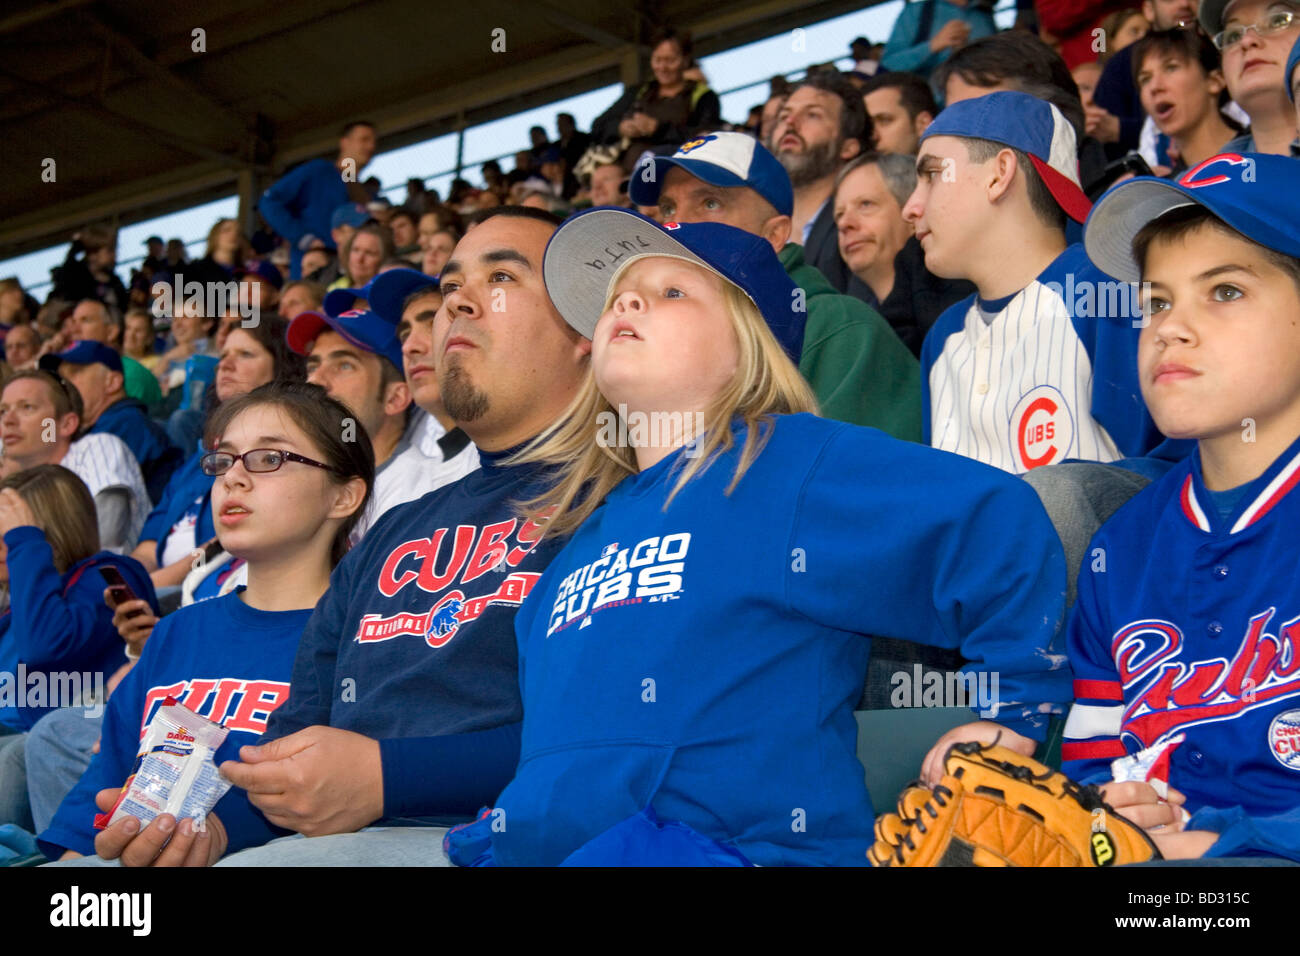 Pin by Dlk Klein on Cubs  Chicago cubs fans, Chicago cubs